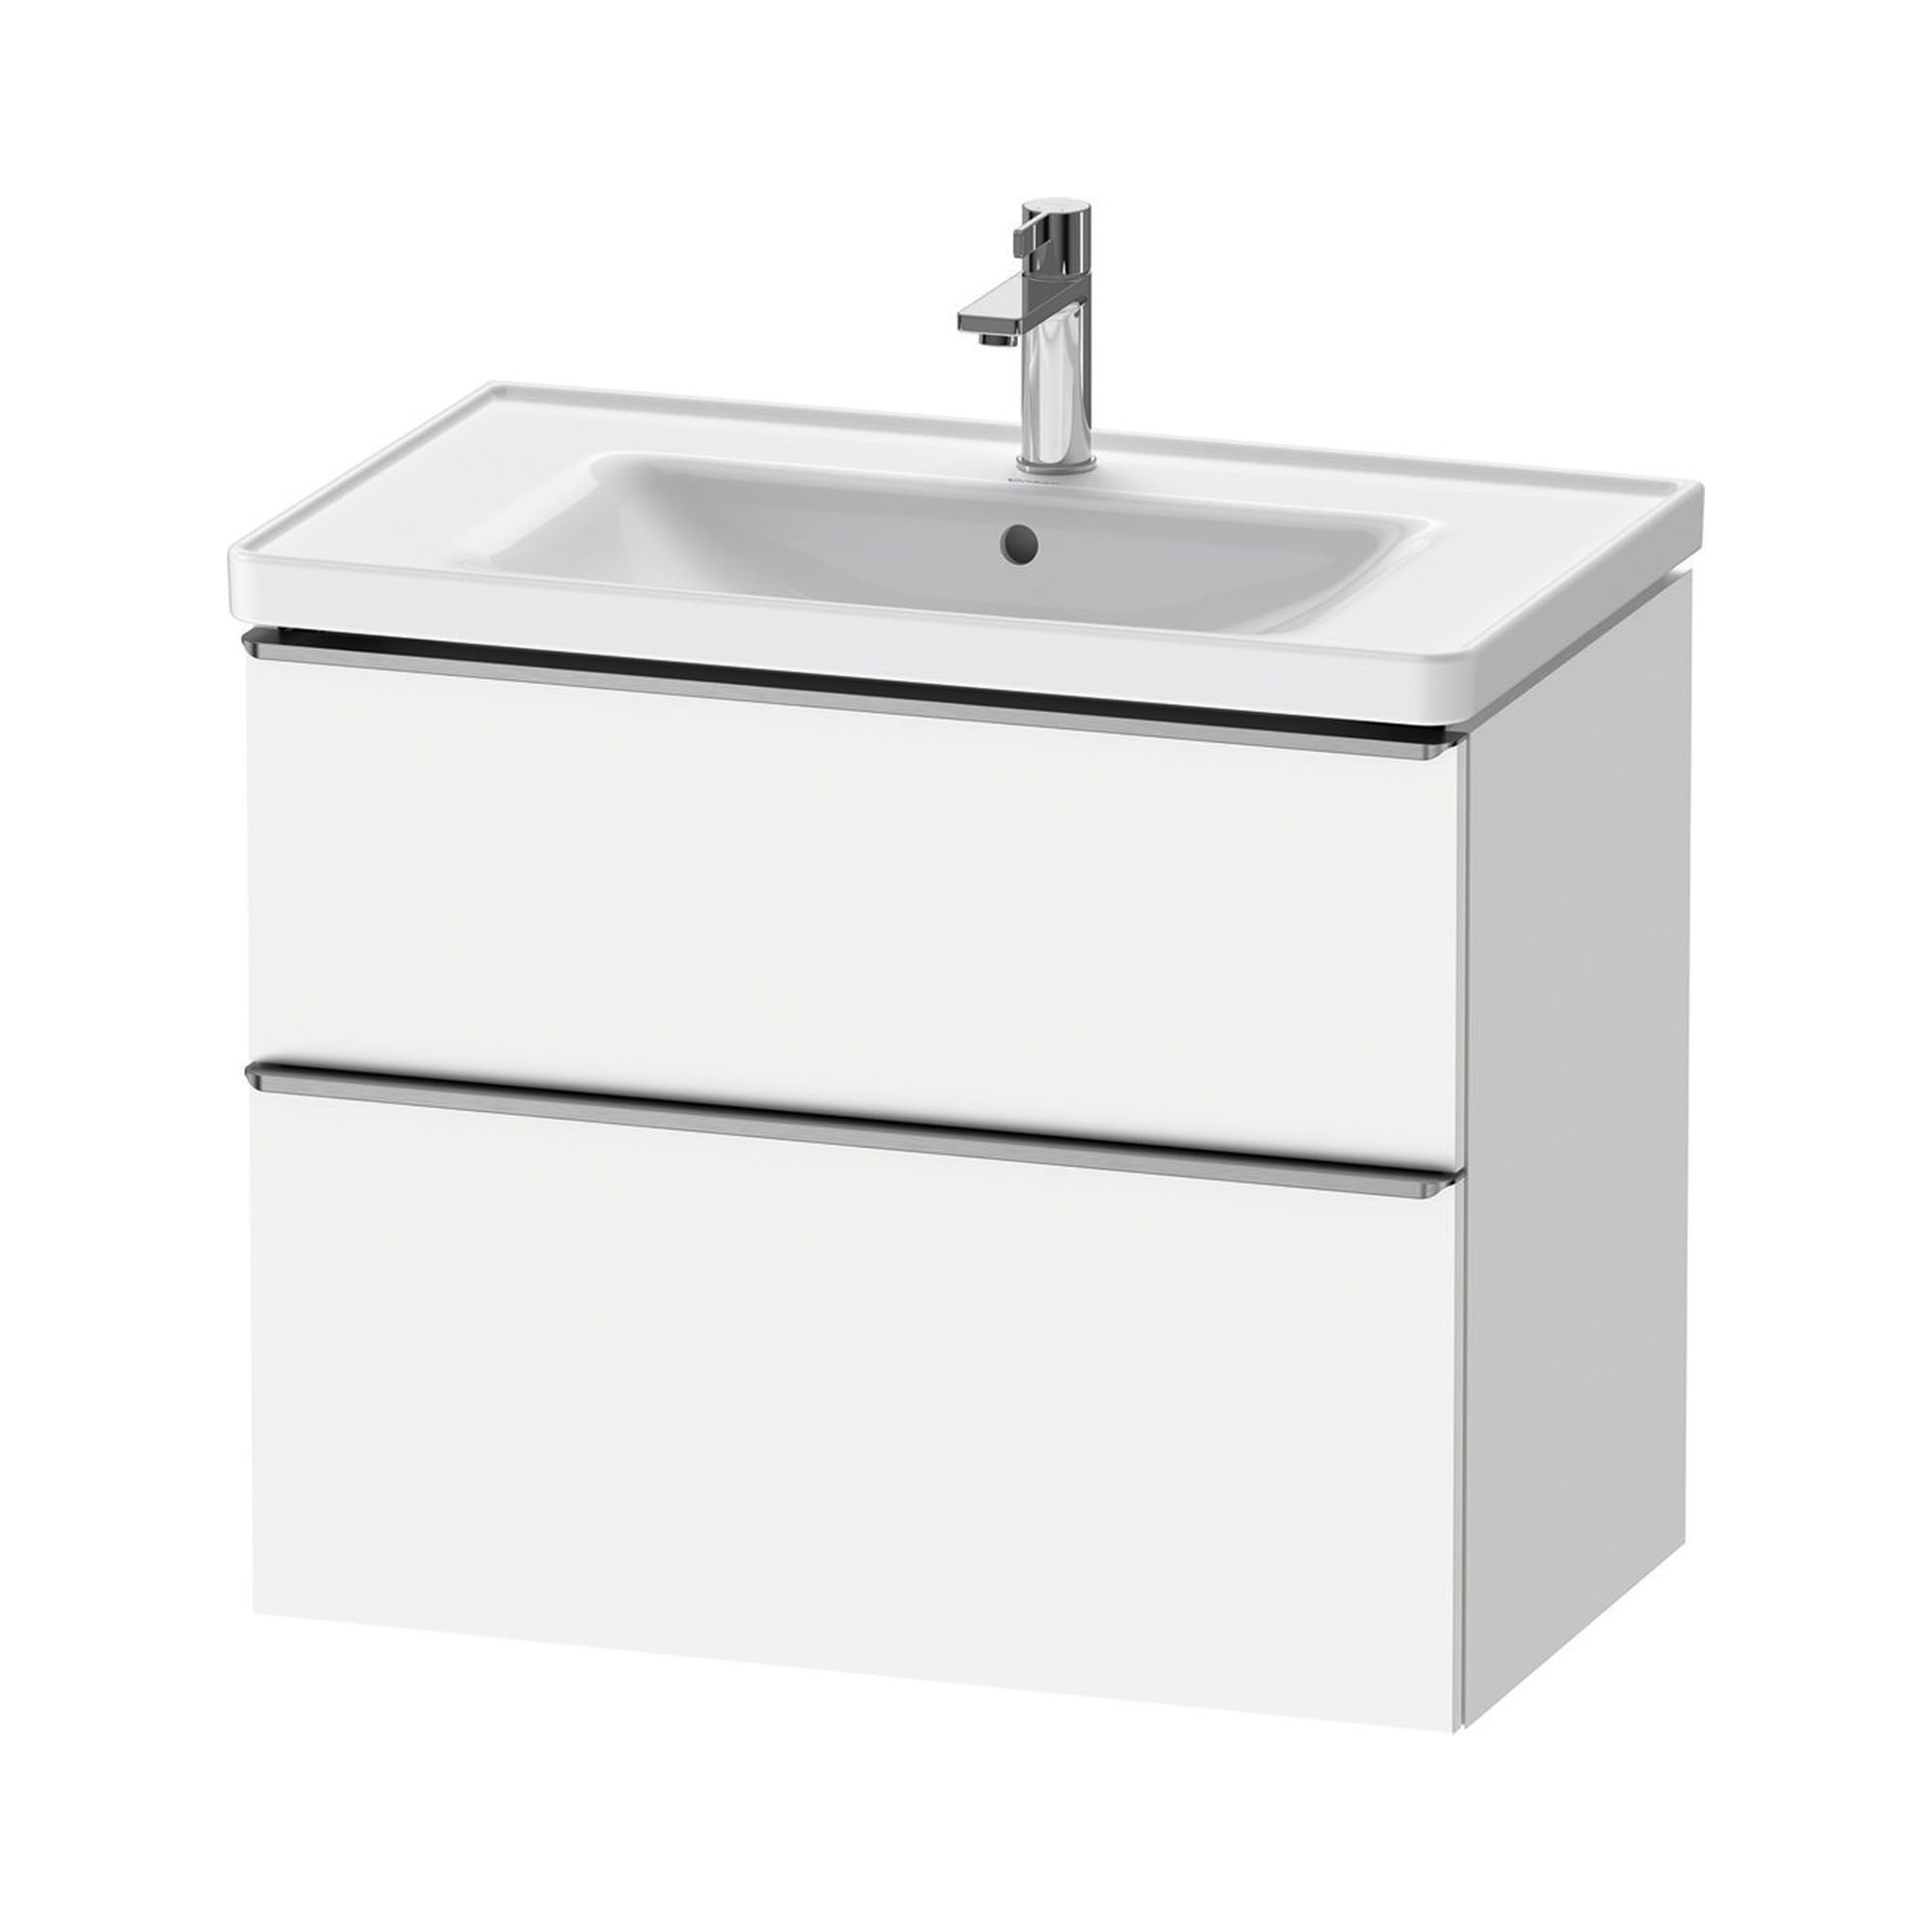 duravit d-neo 800mm wall mounted vanity unit with d-neo basin matt white stainless steel handles